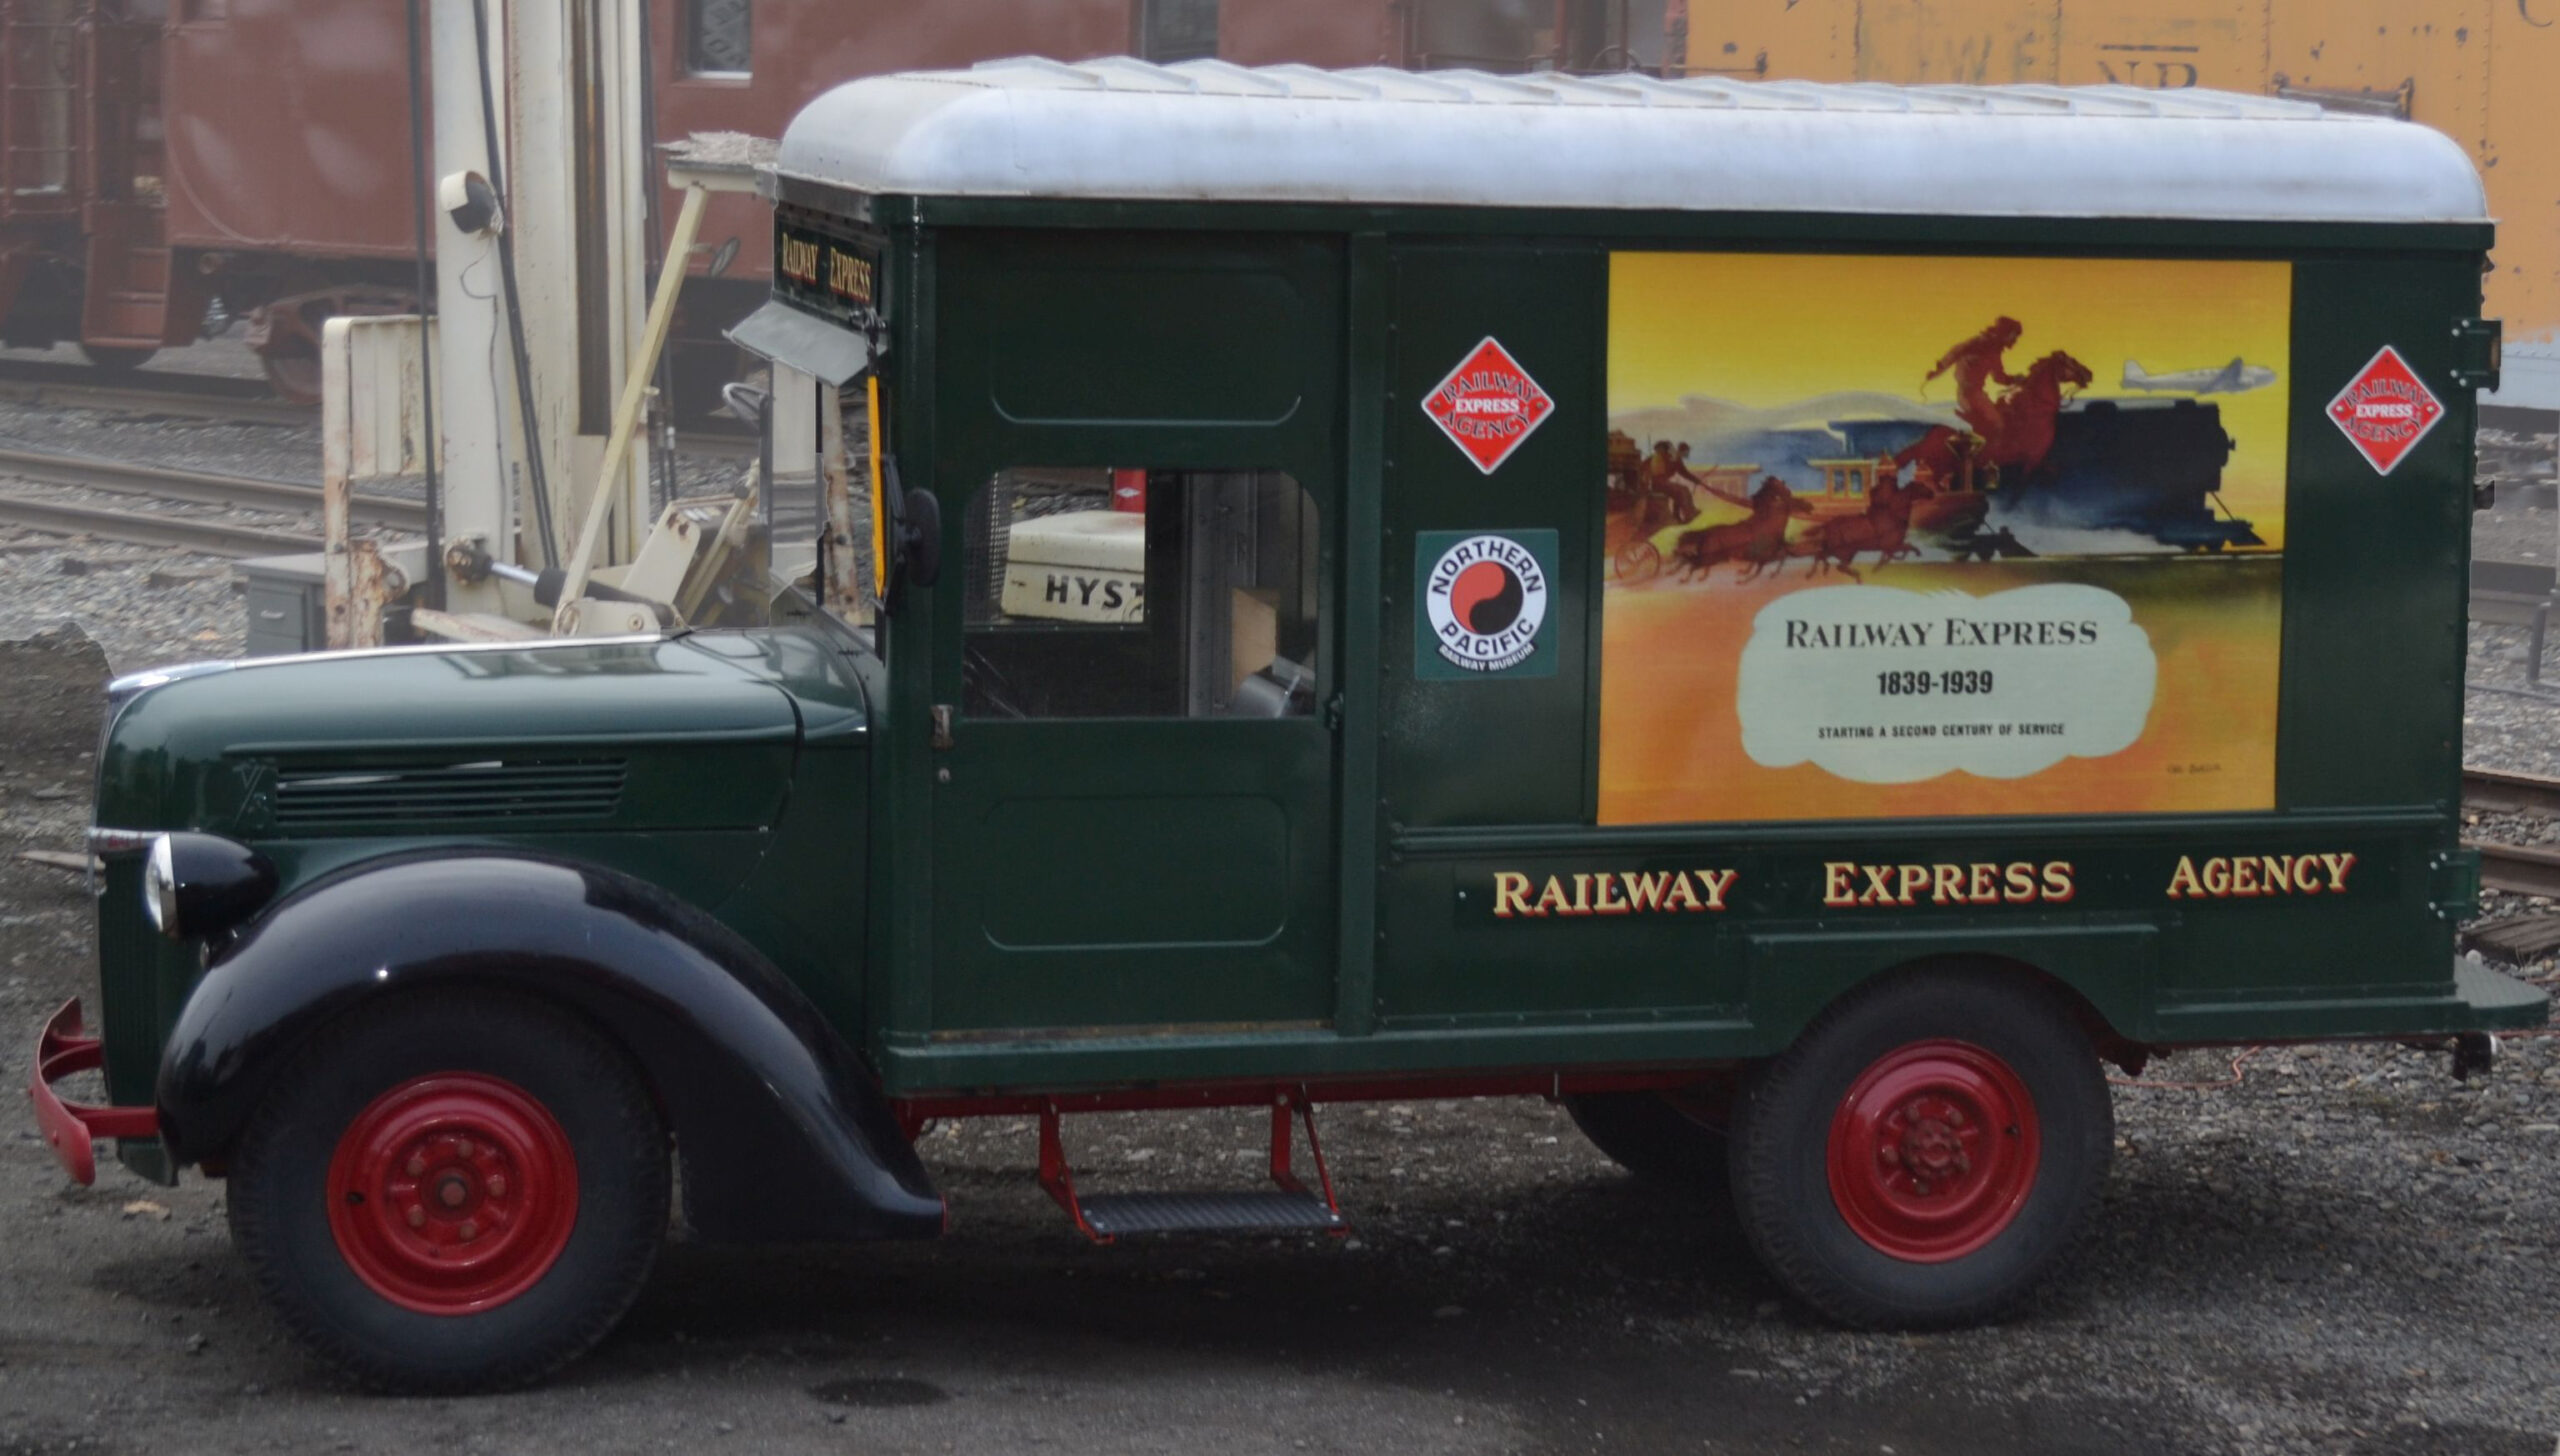 1941 Ford flathead V8 Railway Express Agency delivery truck in museum yard